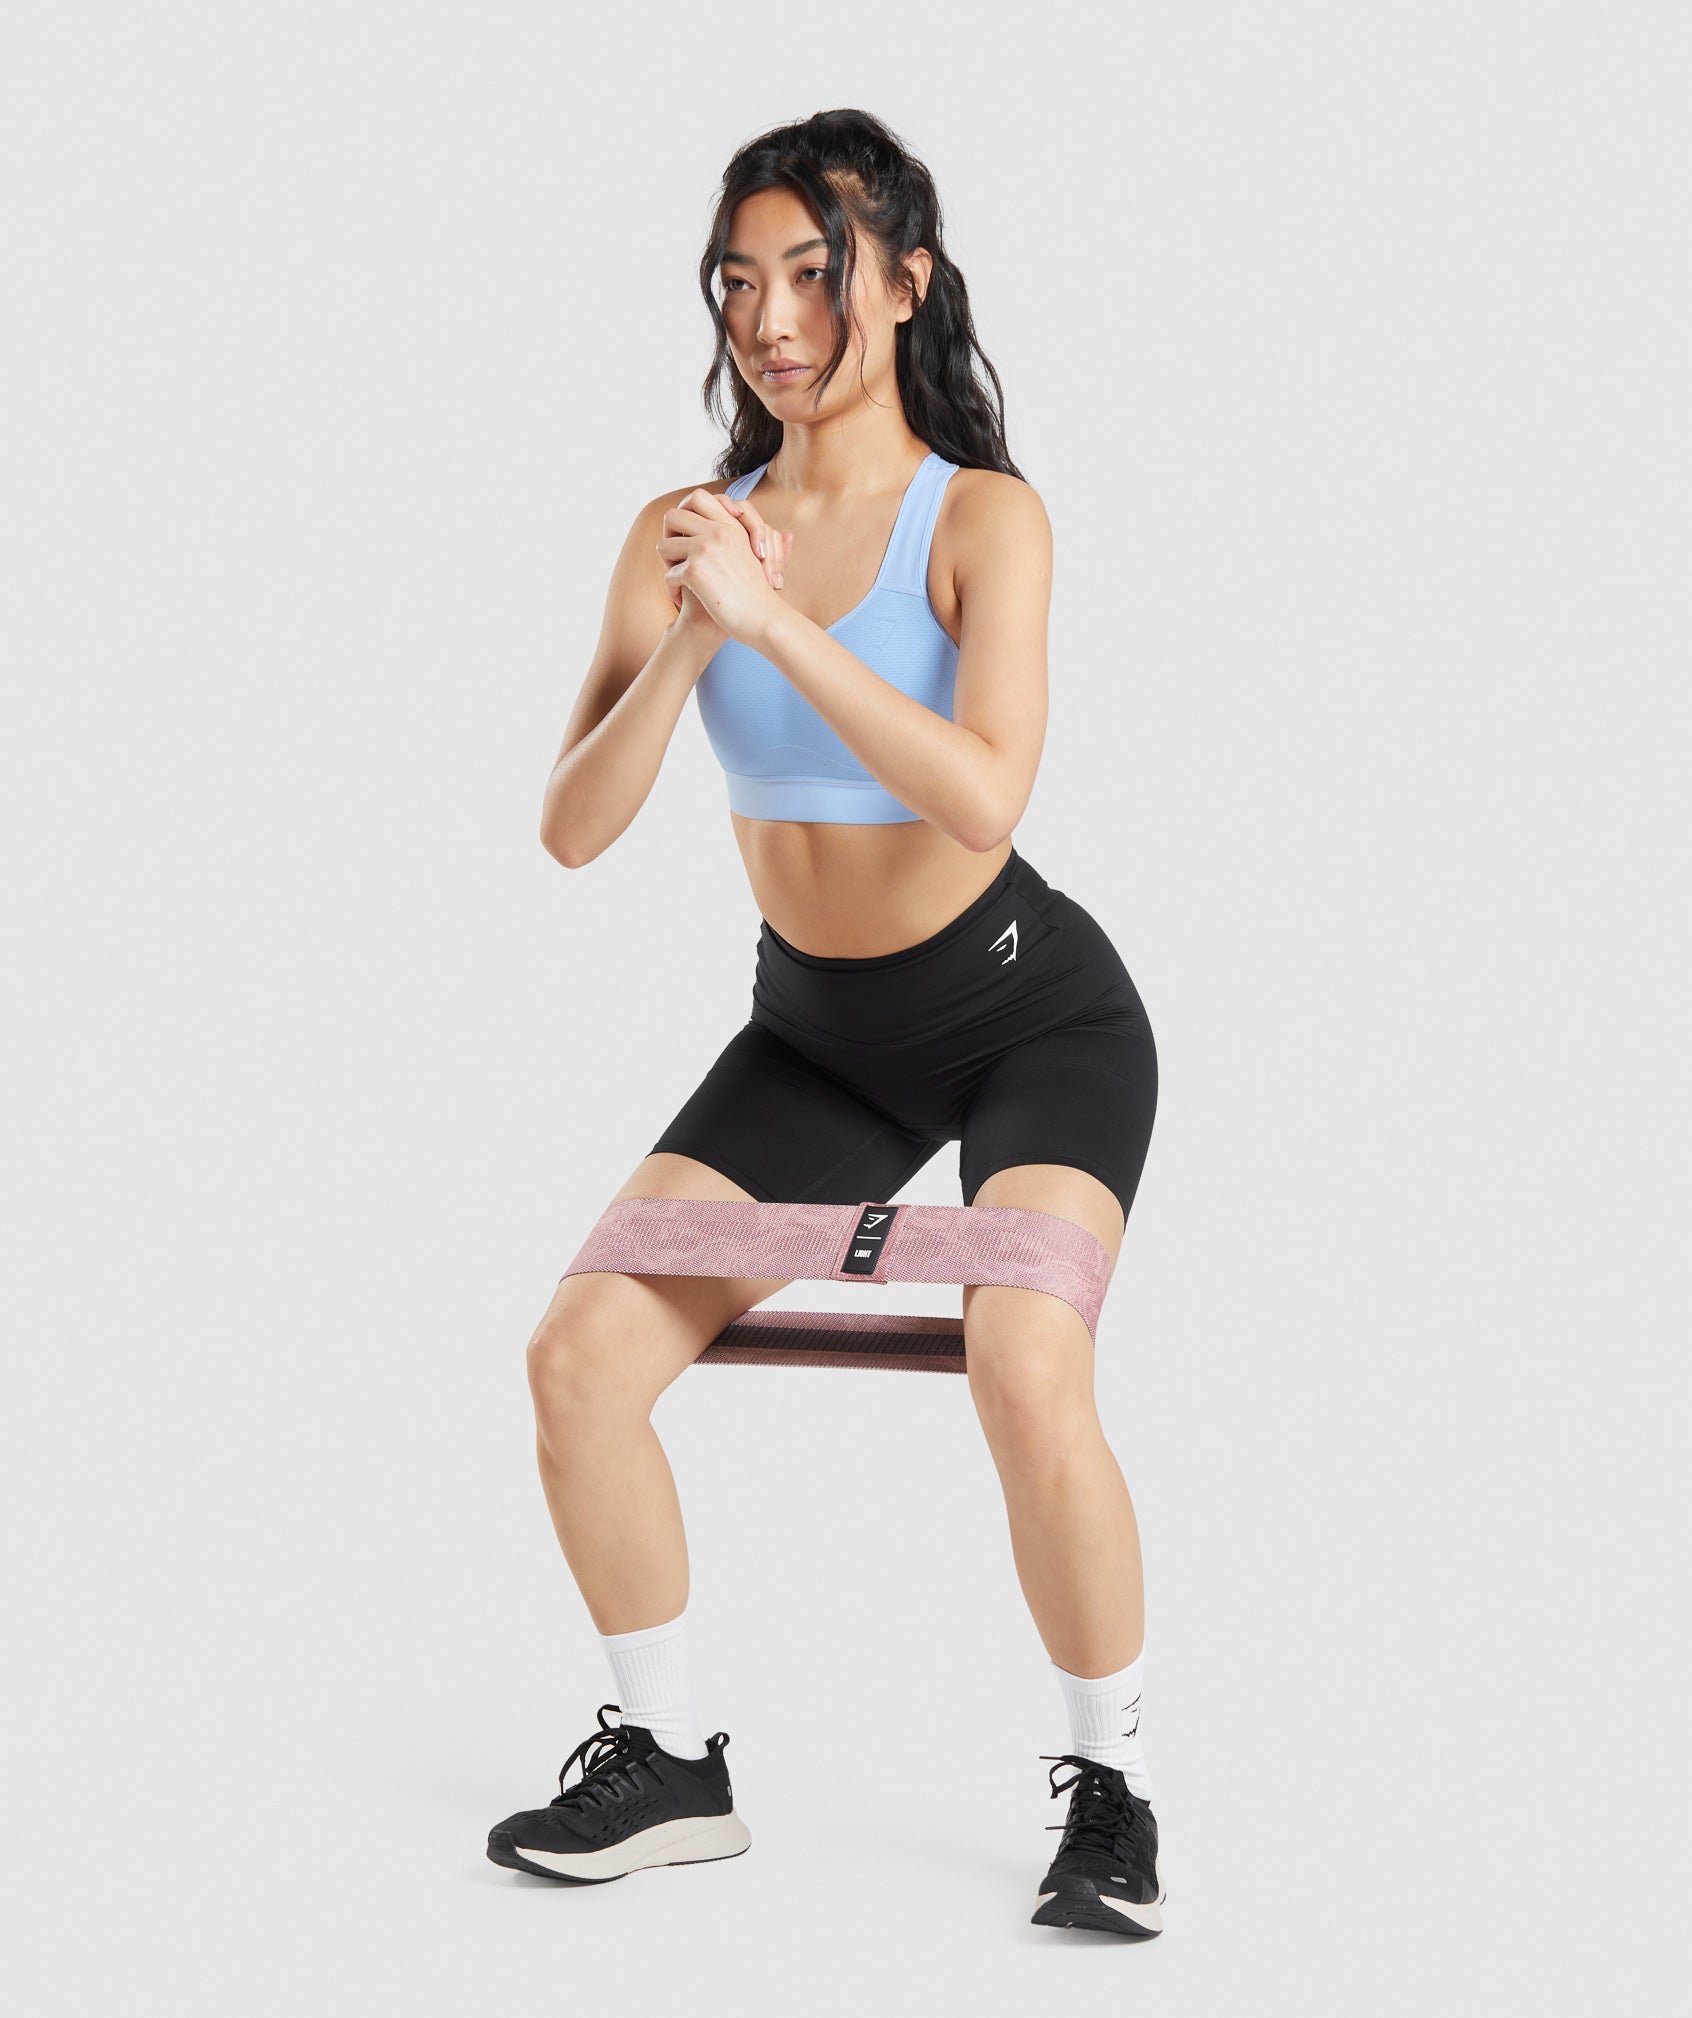 Light Glute Band in Alice Pink Print - view 2